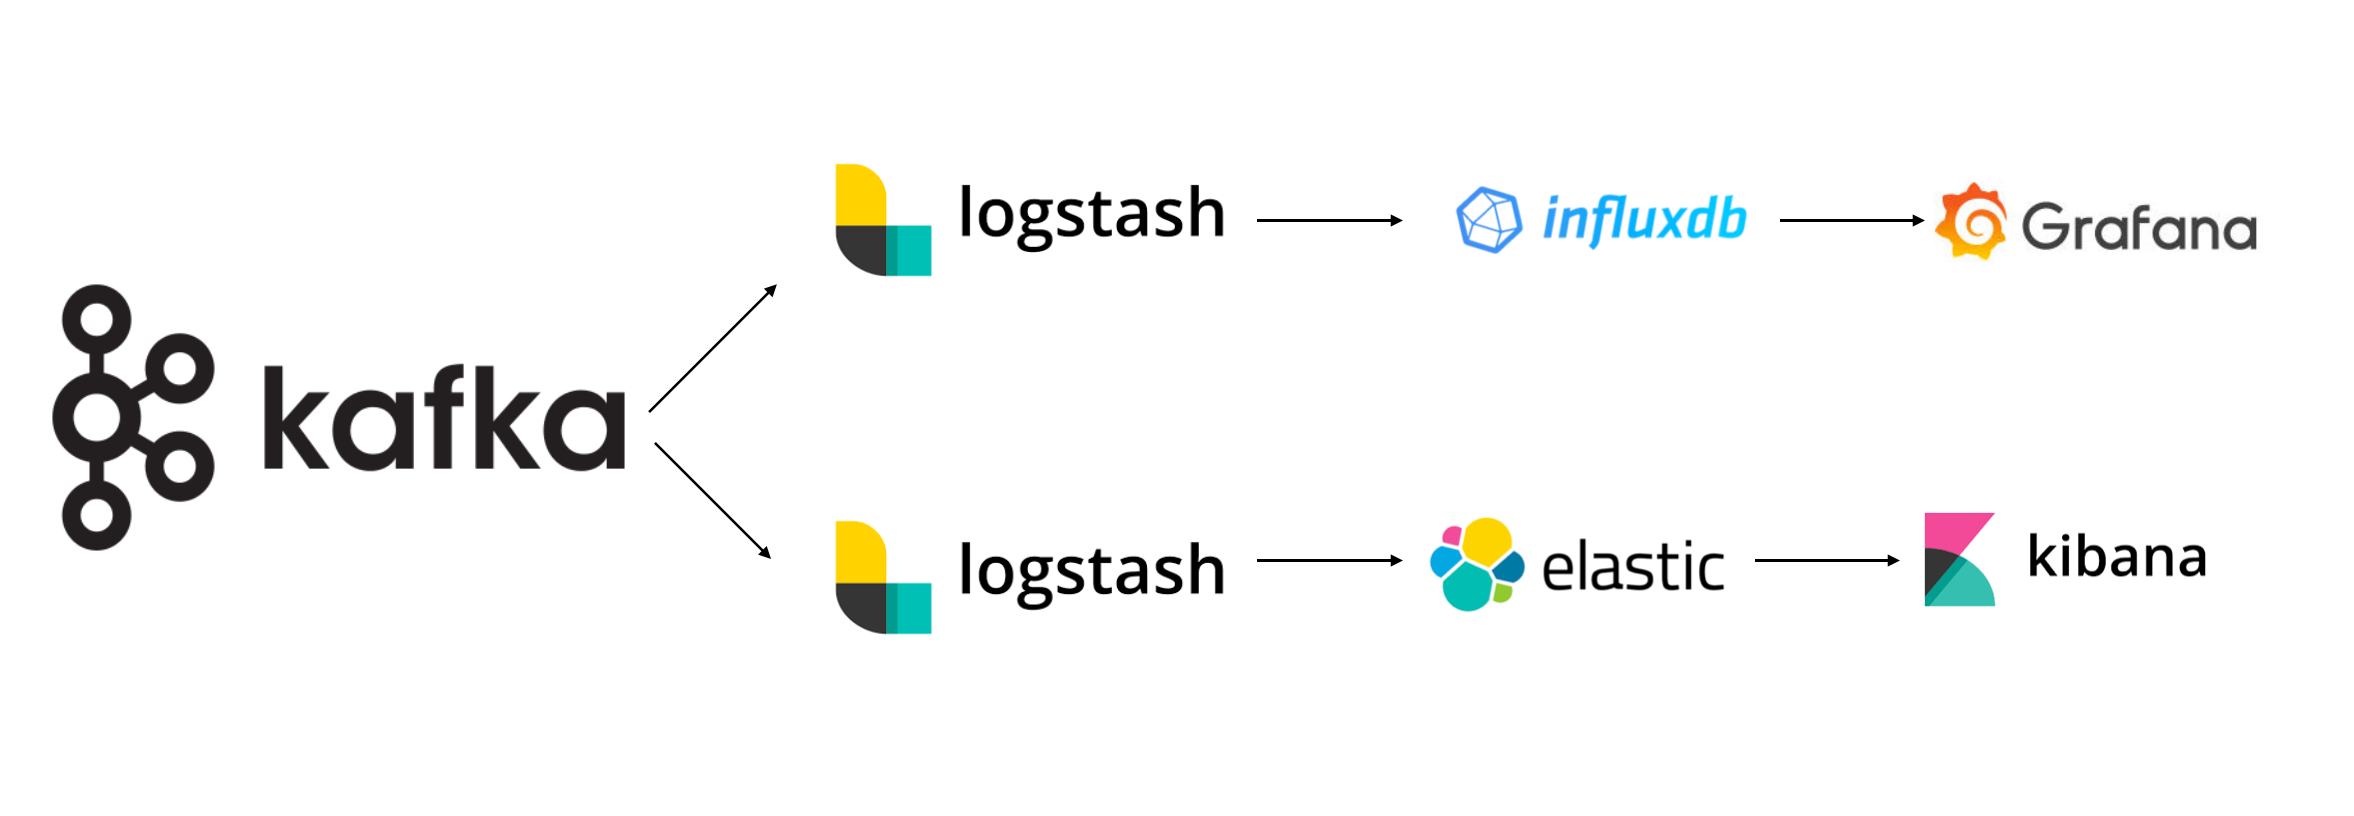 a graph showing Kafka at the left side with horizontal logos stacked in lines on top of one another. The top line has logstash -> influxdb -> and Grafana. The bottom line has logstash -> elastic -> kibana